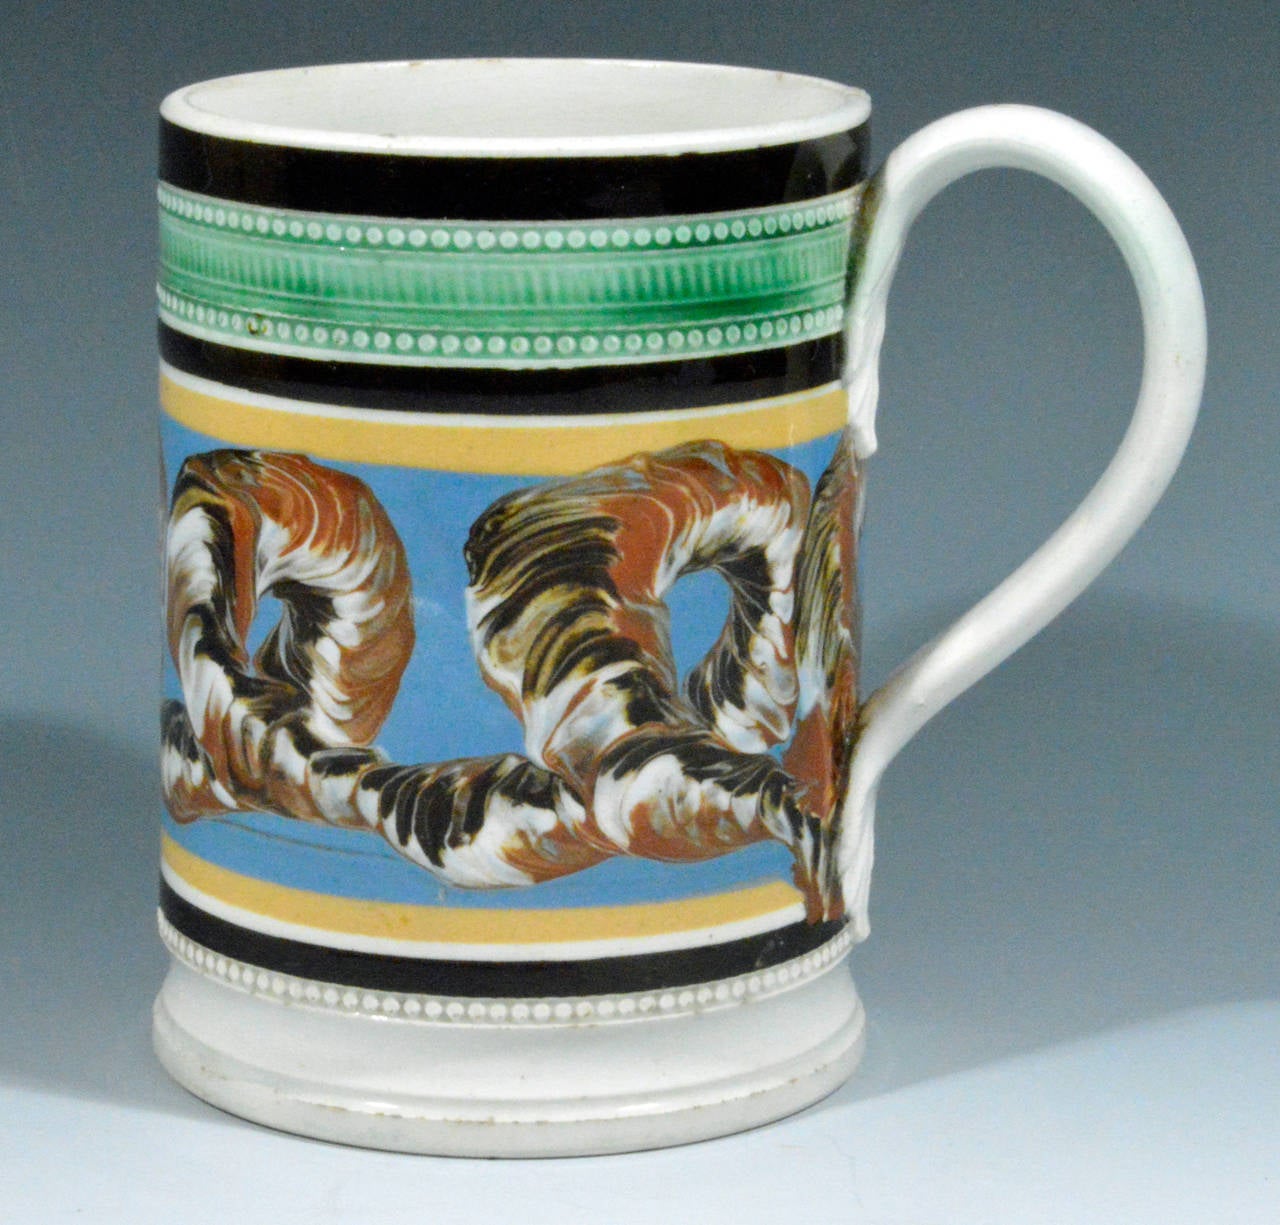 The tankard with a central band of earthworm design on a light blue slip ground framed between continuous bands of yellow, white and brown.  The rim has a wide band of brown above a green band with moulded pearls.